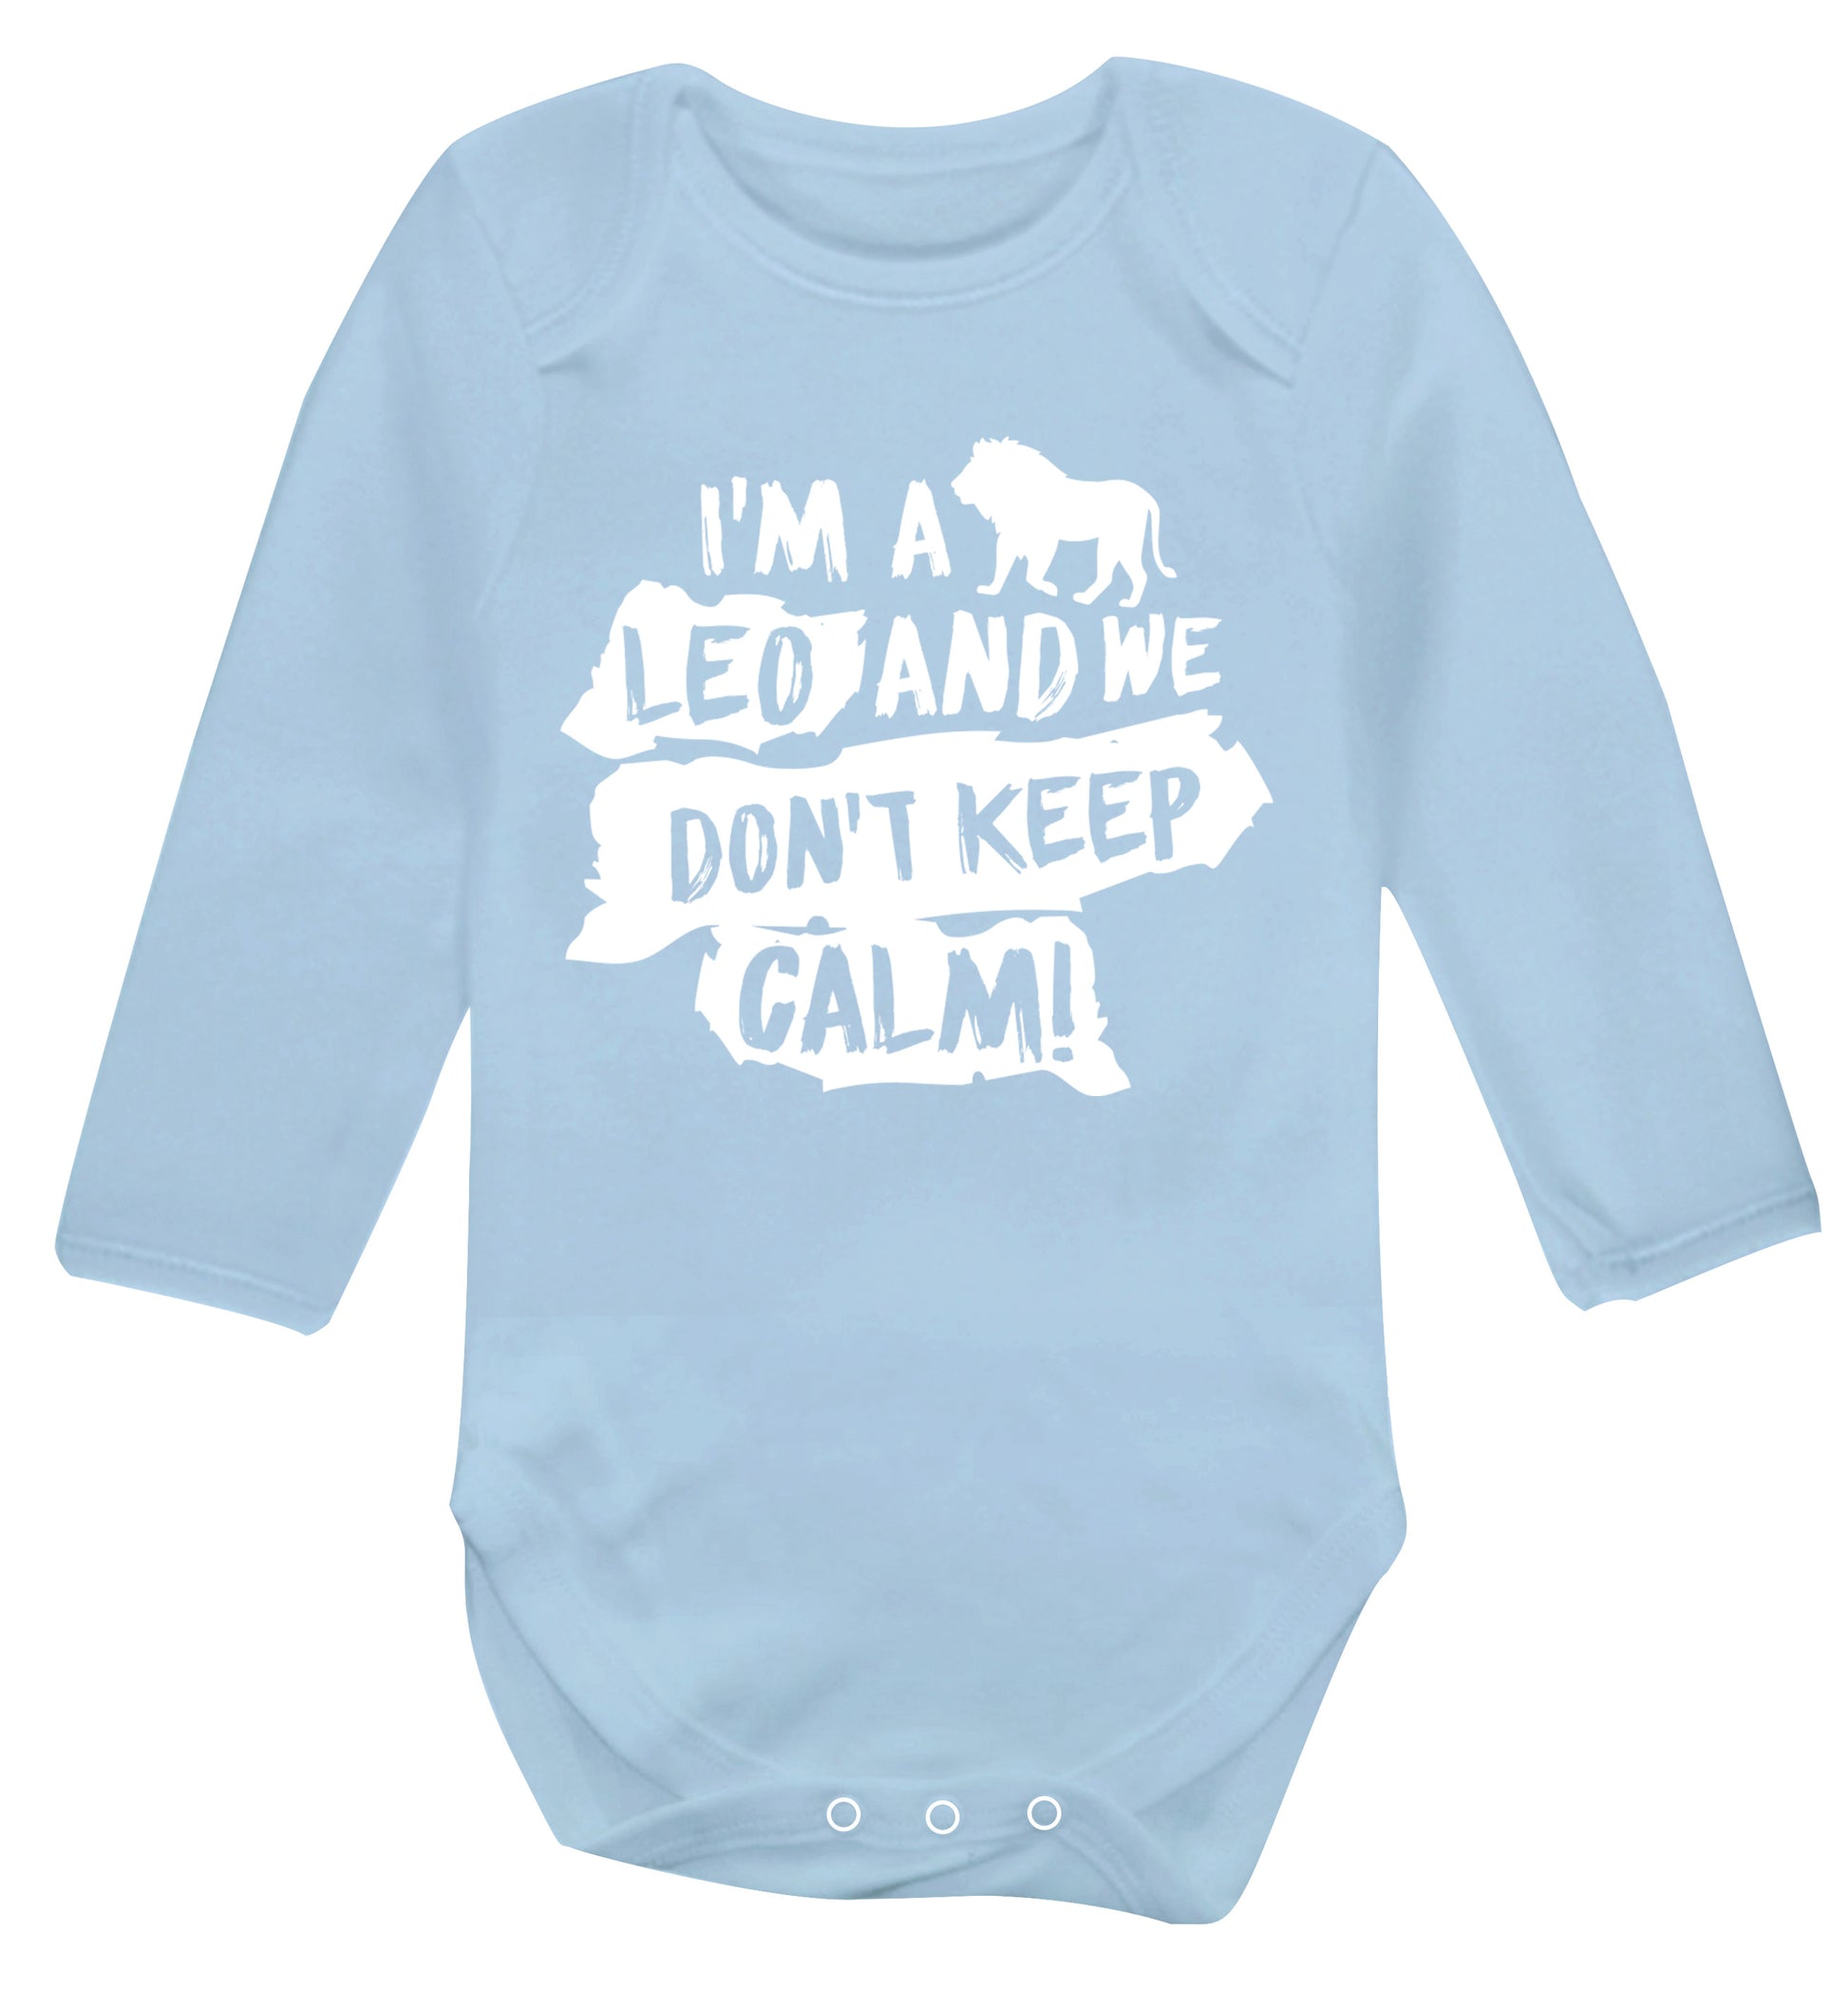 I'm a leo and we don't keep calm! Baby Vest long sleeved pale blue 6-12 months